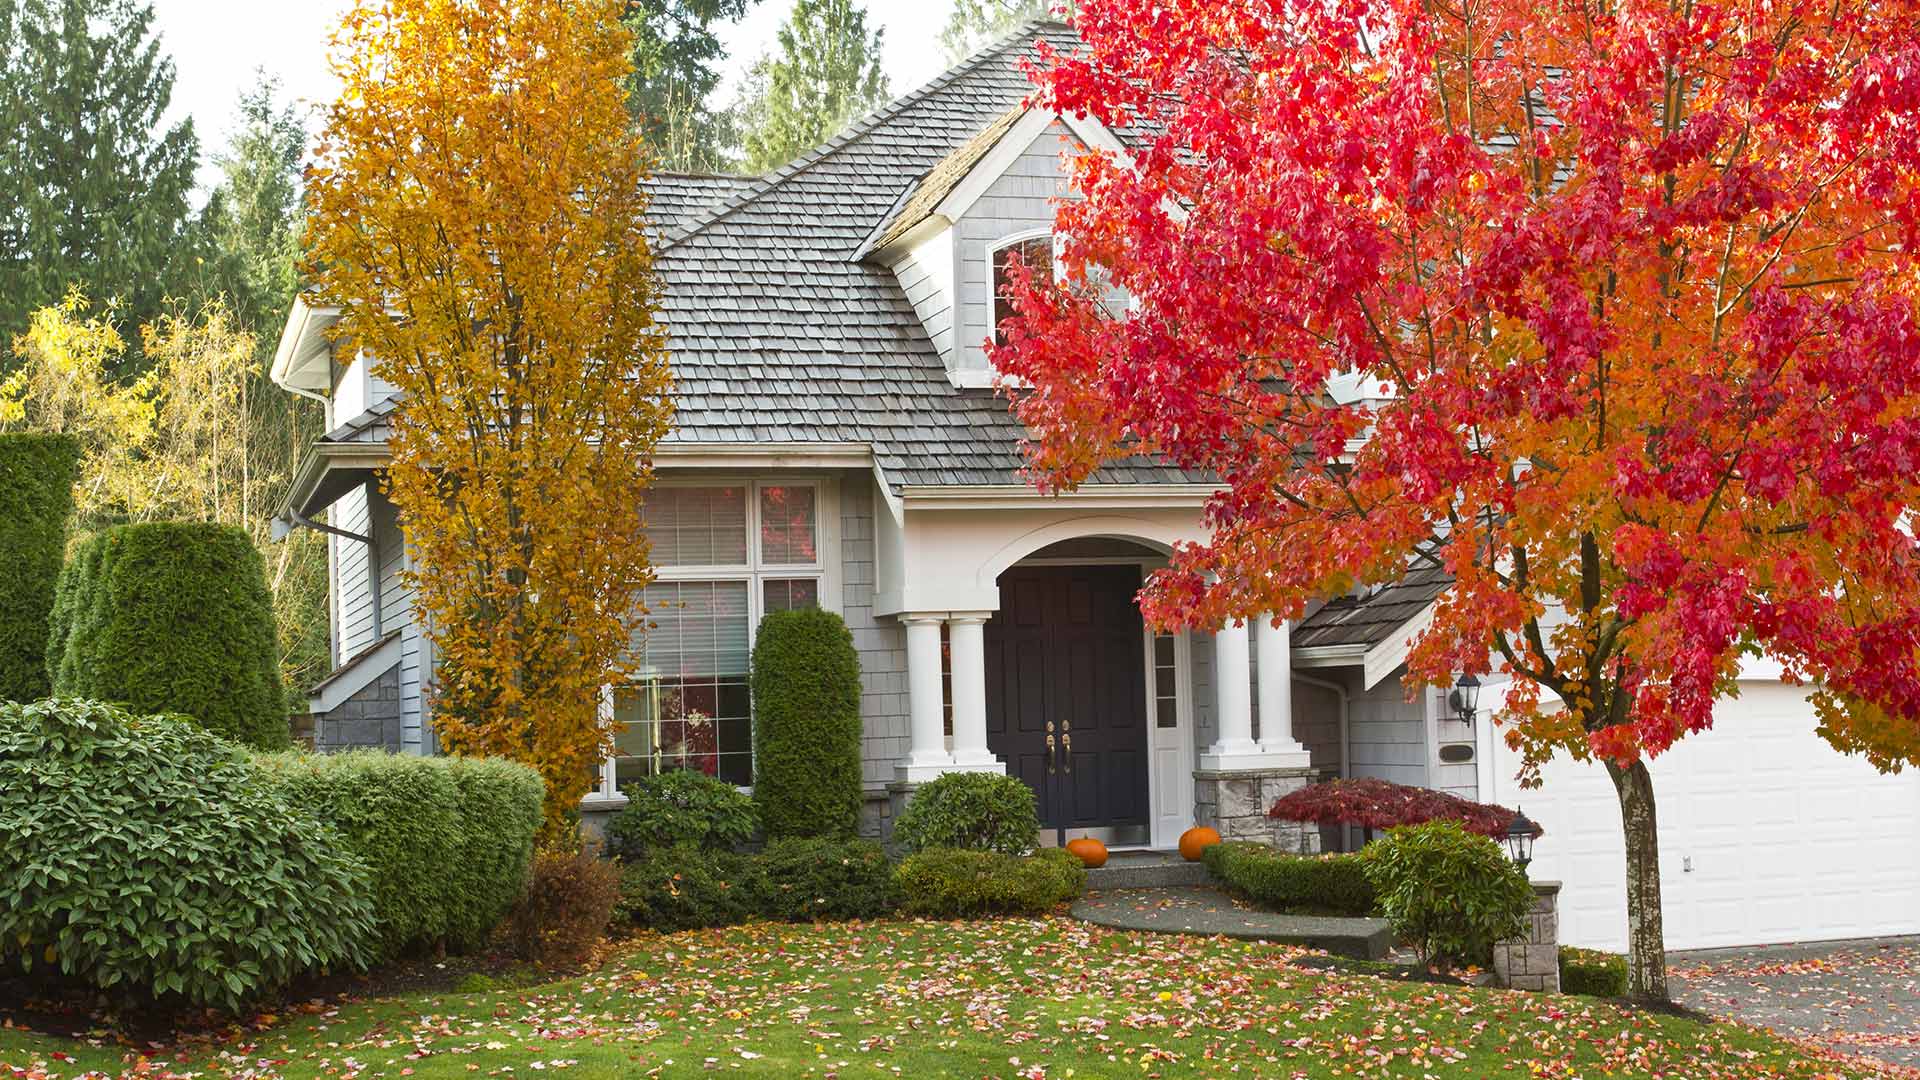 A Happy Valley, OR home in the fall with leaves and pumpkins.